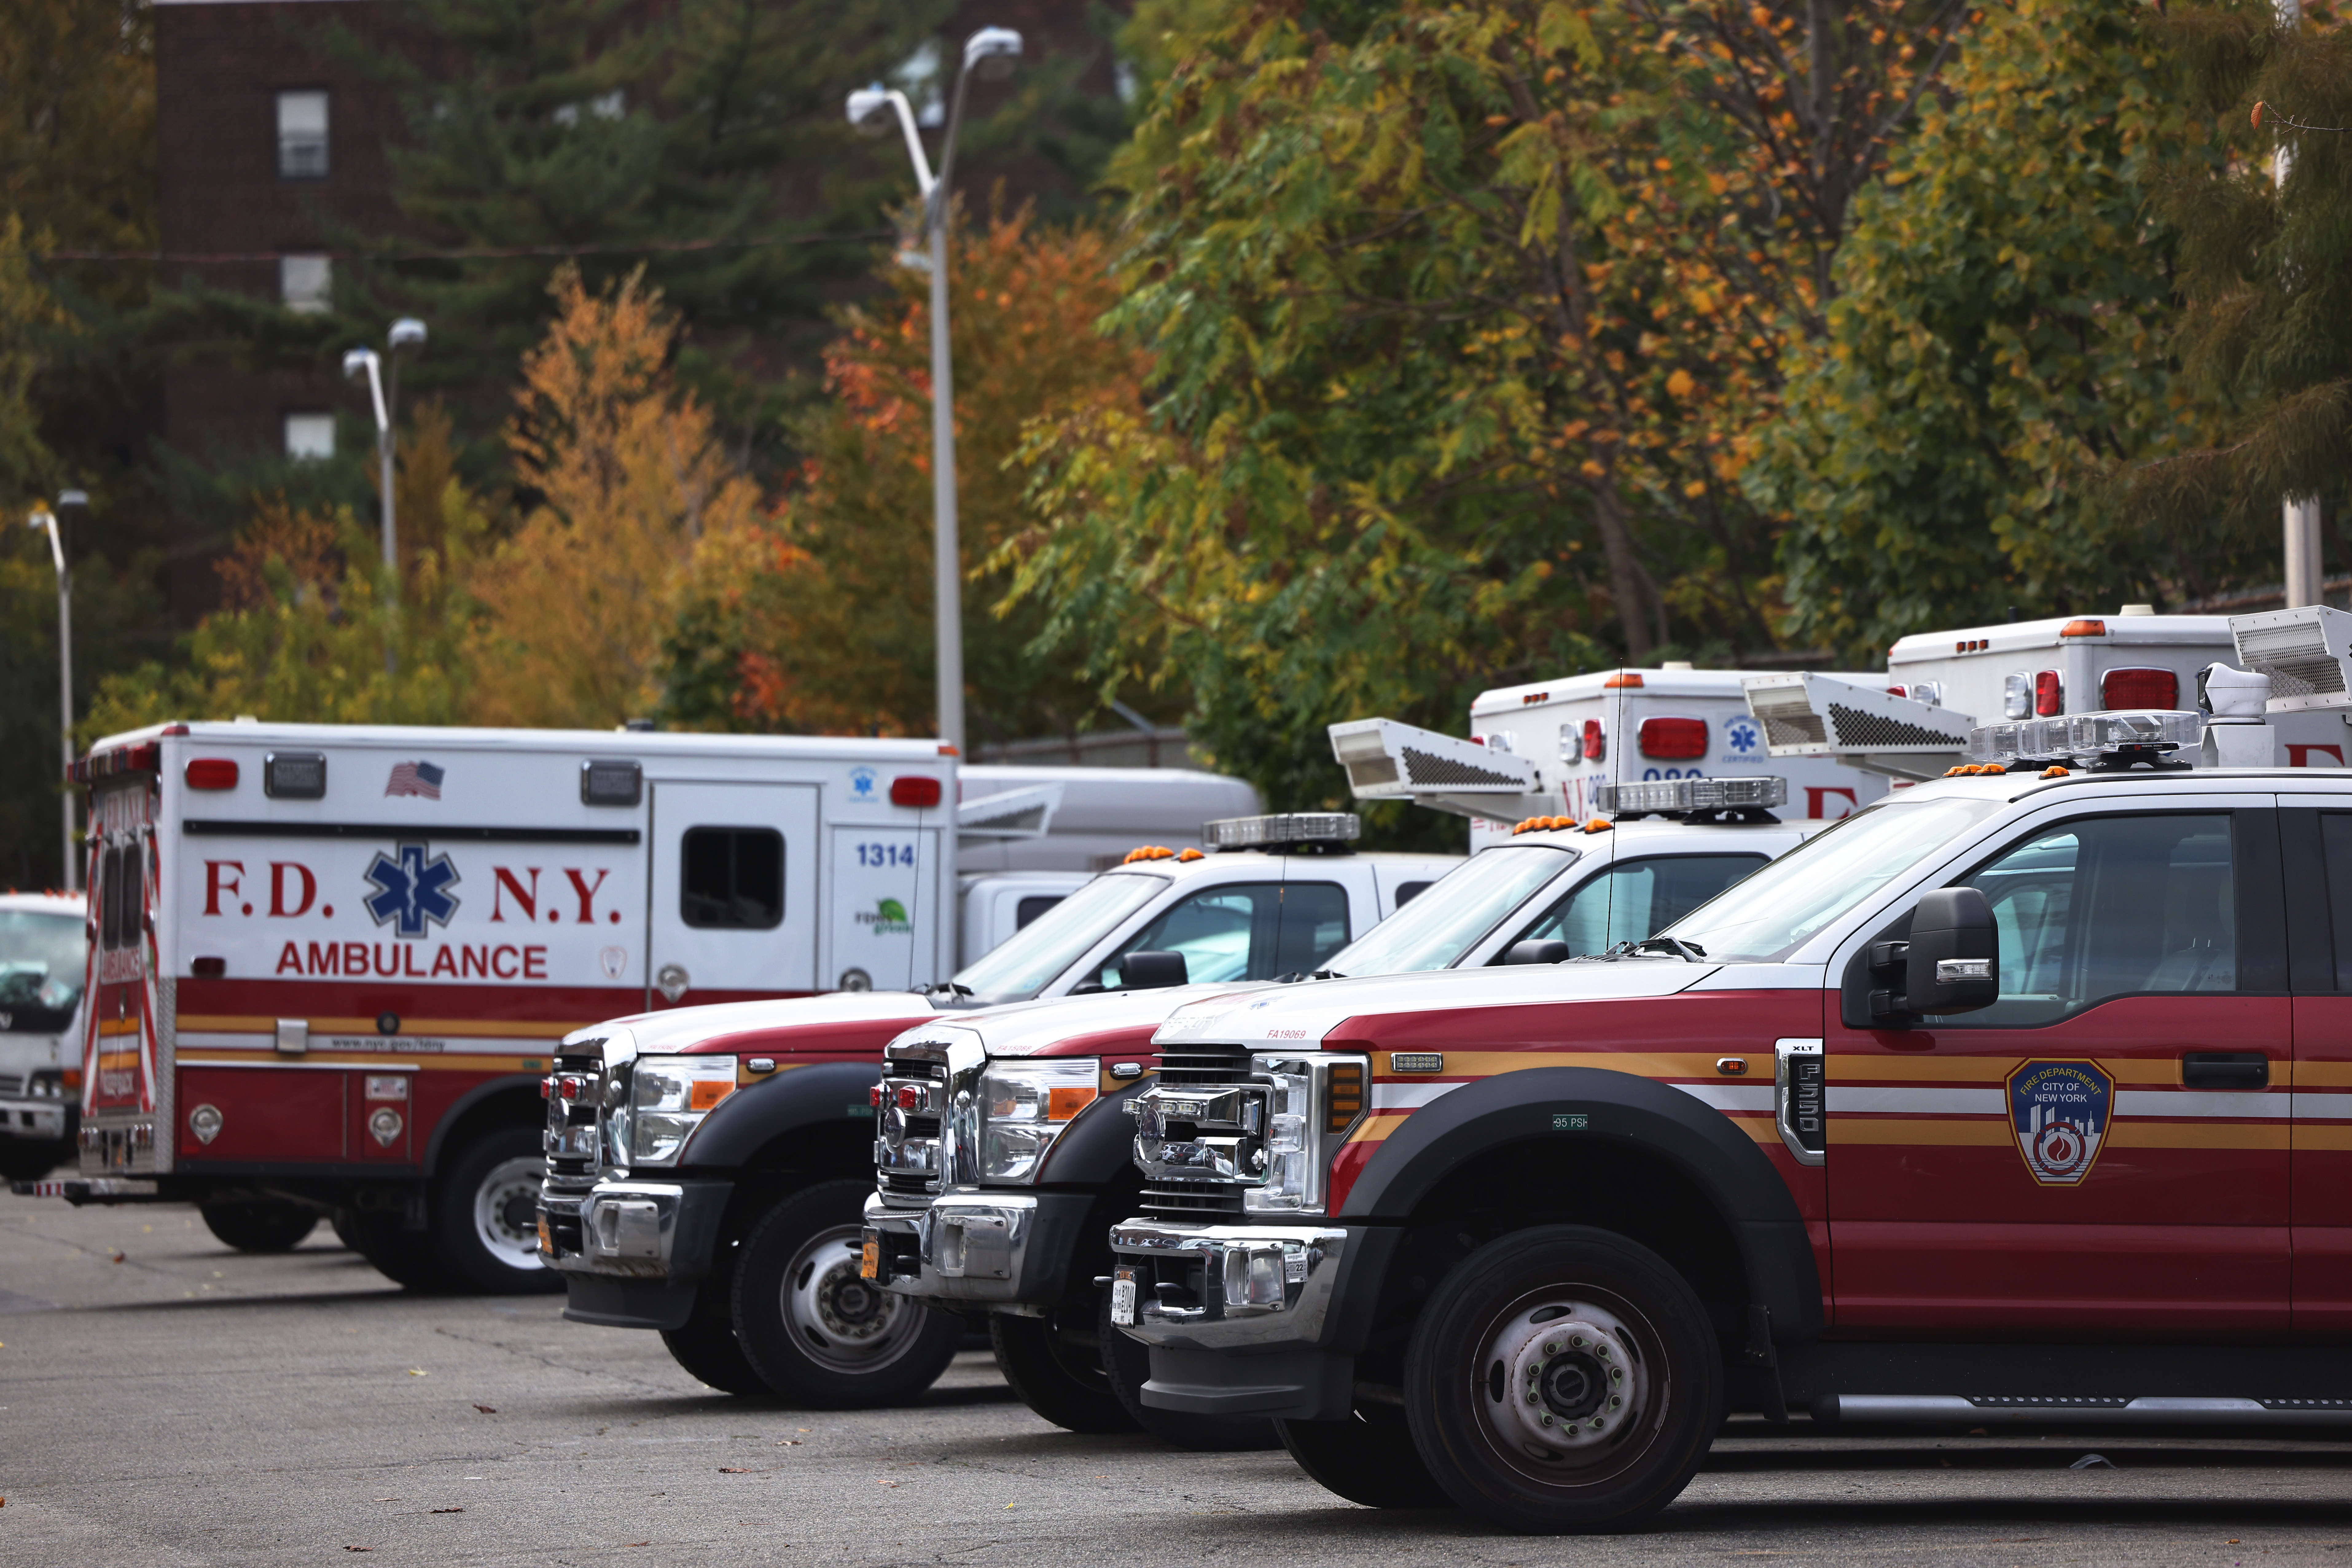 FDNY ambulance trucks are seen parked at NYC Health + Hospitals/Gotham Health parking lot in Fort Greene, Brooklyn. Oct. 29, 2021